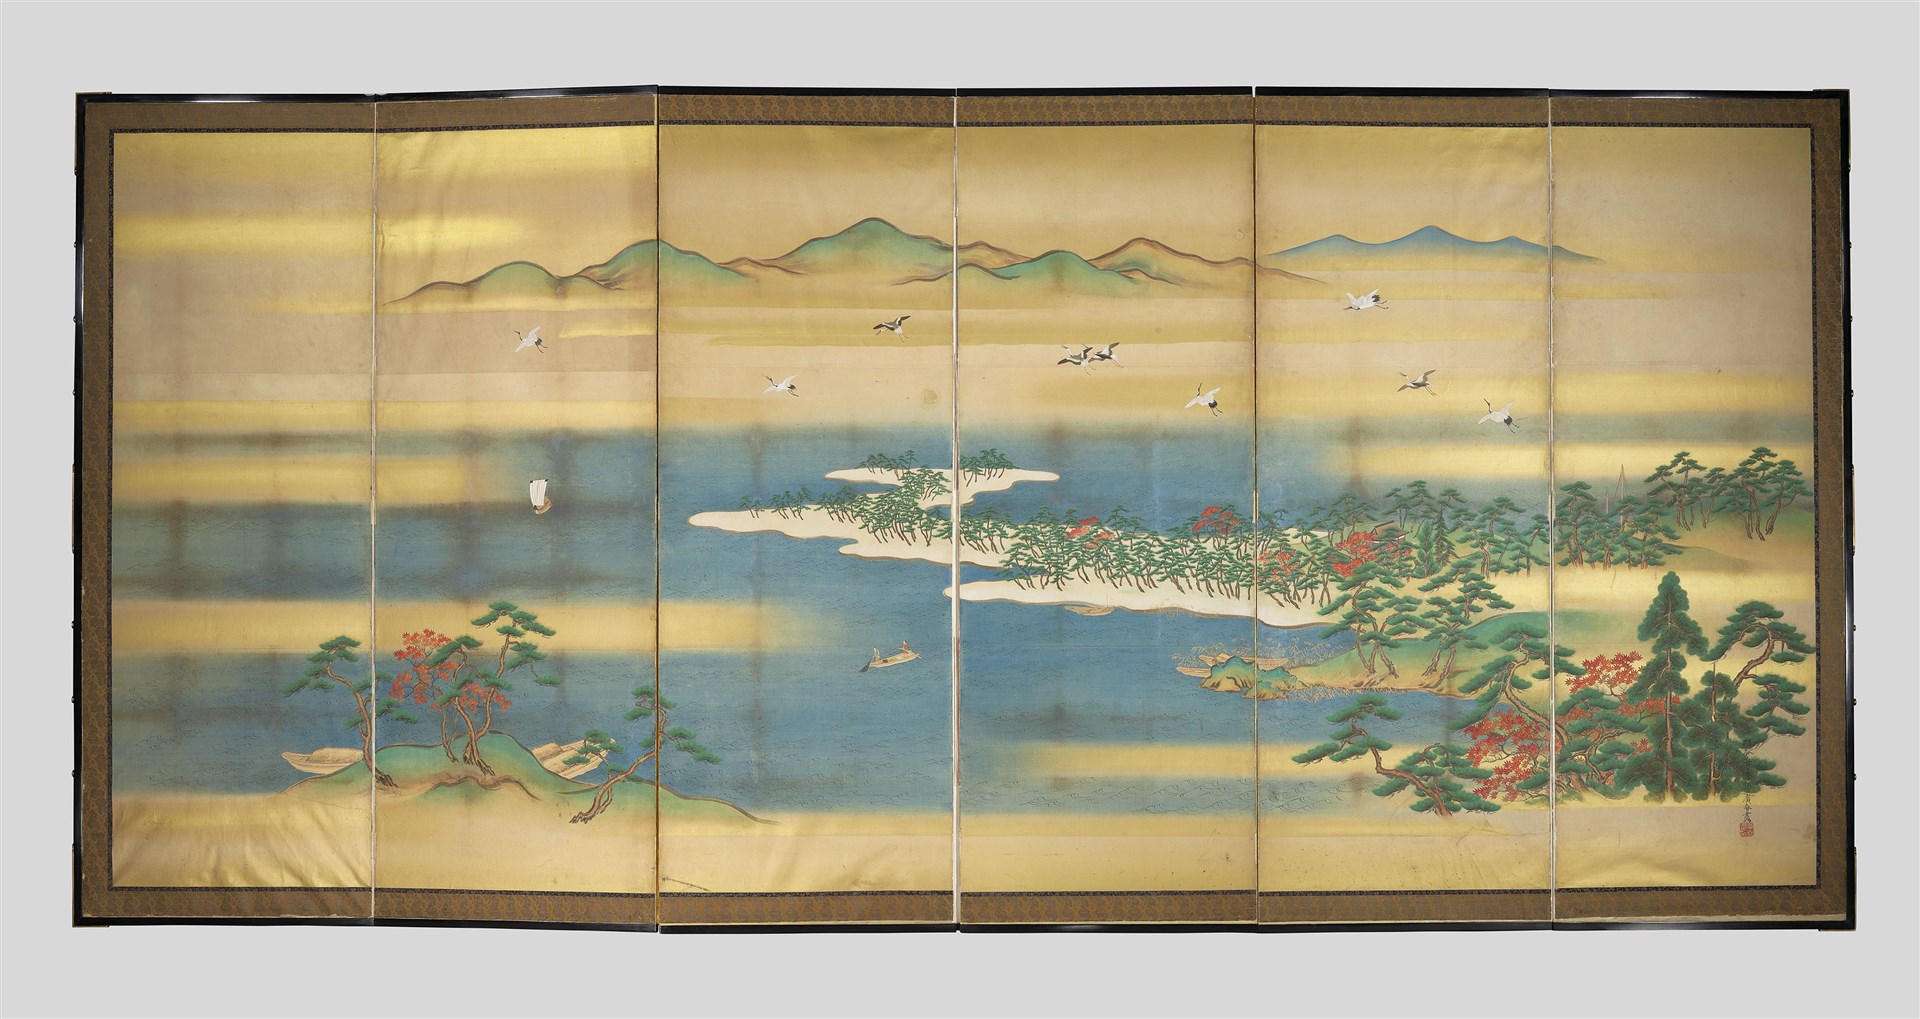 The second of the pair of folding screen paintings is dominated by a scene of Miho no Matsubara (Royal Collection/HM Queen Elizabeth II 2022/PA)